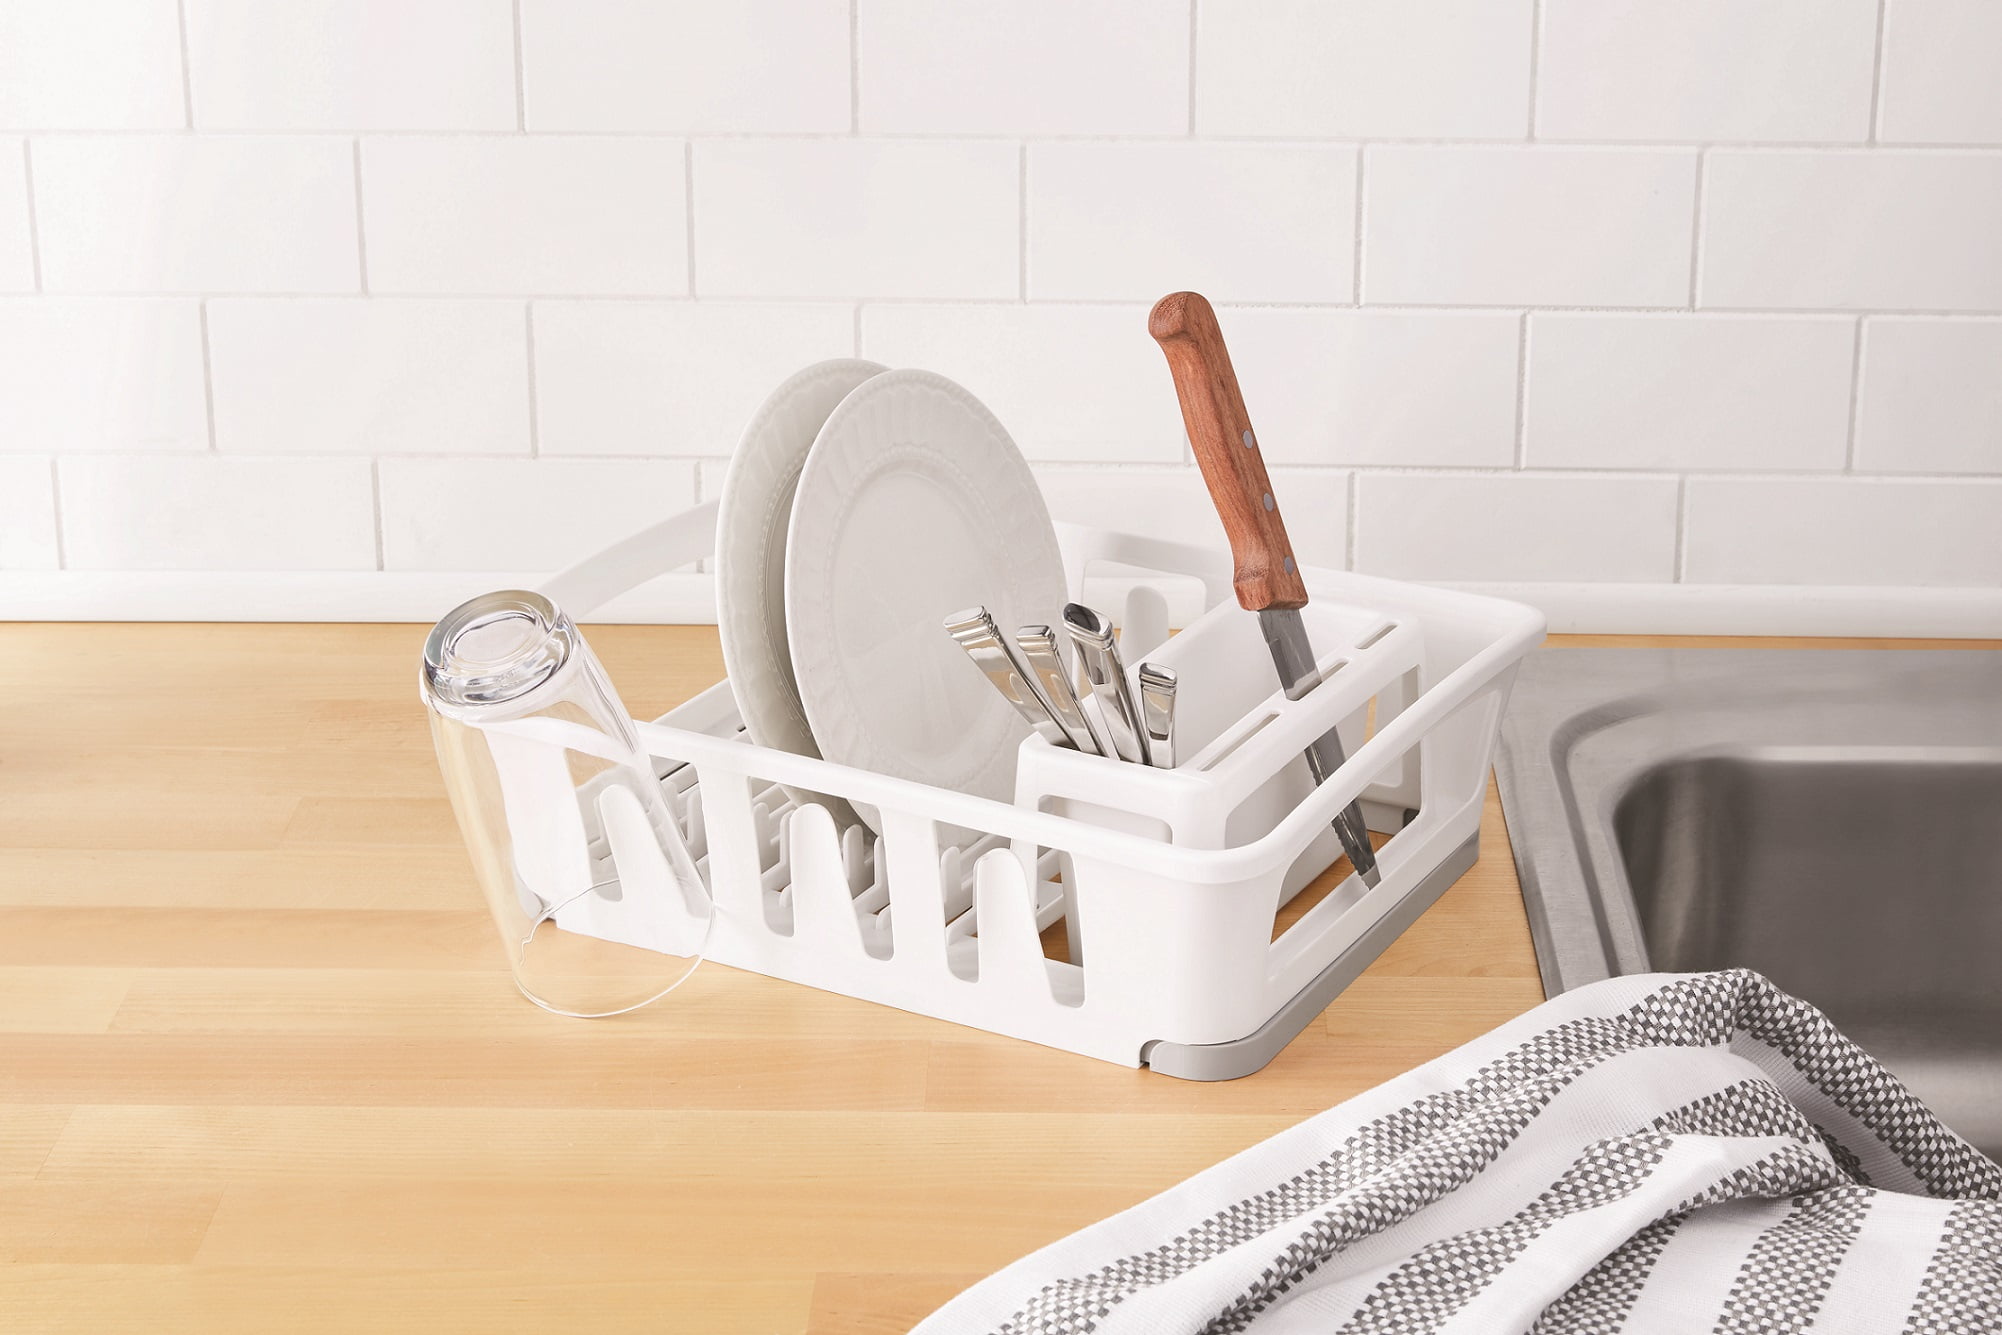  Popity home Dish Drying Rack, Dish Rcks for Kitchen Counter,  Small Stainless Dteel Dish Drainer Dack with White Cutlery Holder and  Drainboard